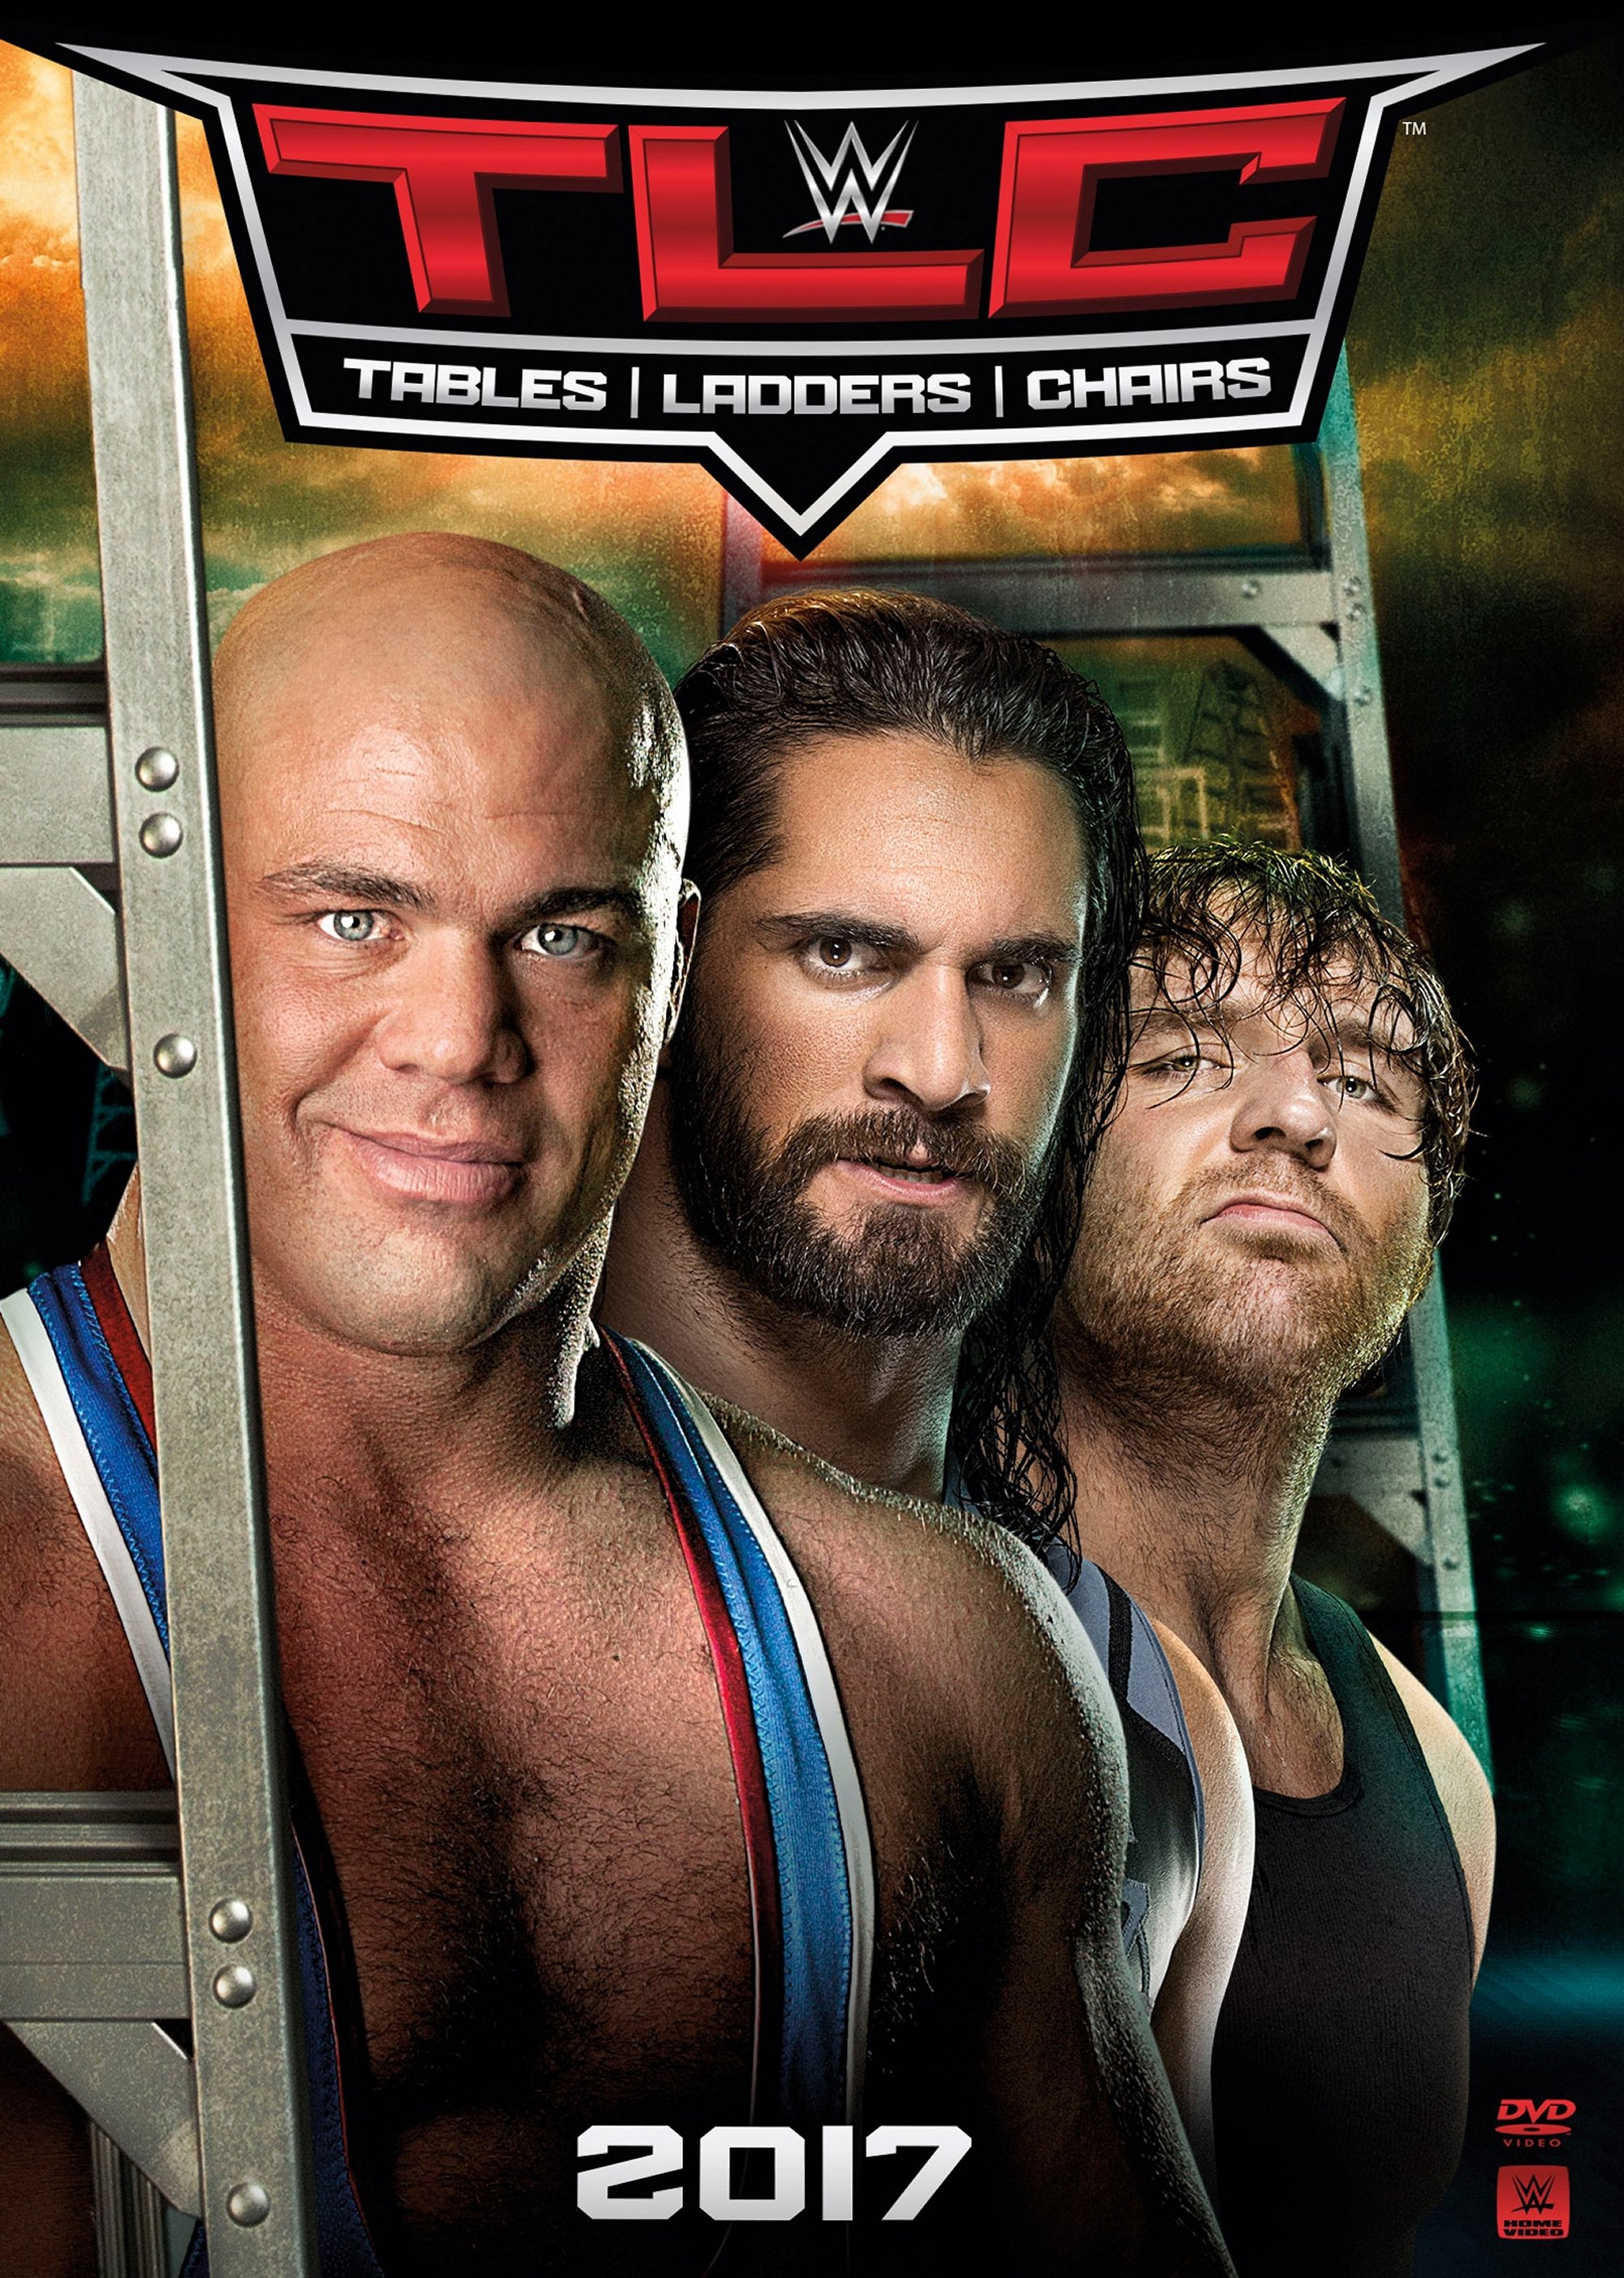 WWE: TLC - Tables, Ladders and Chairs 2017 [DVD] [2017]